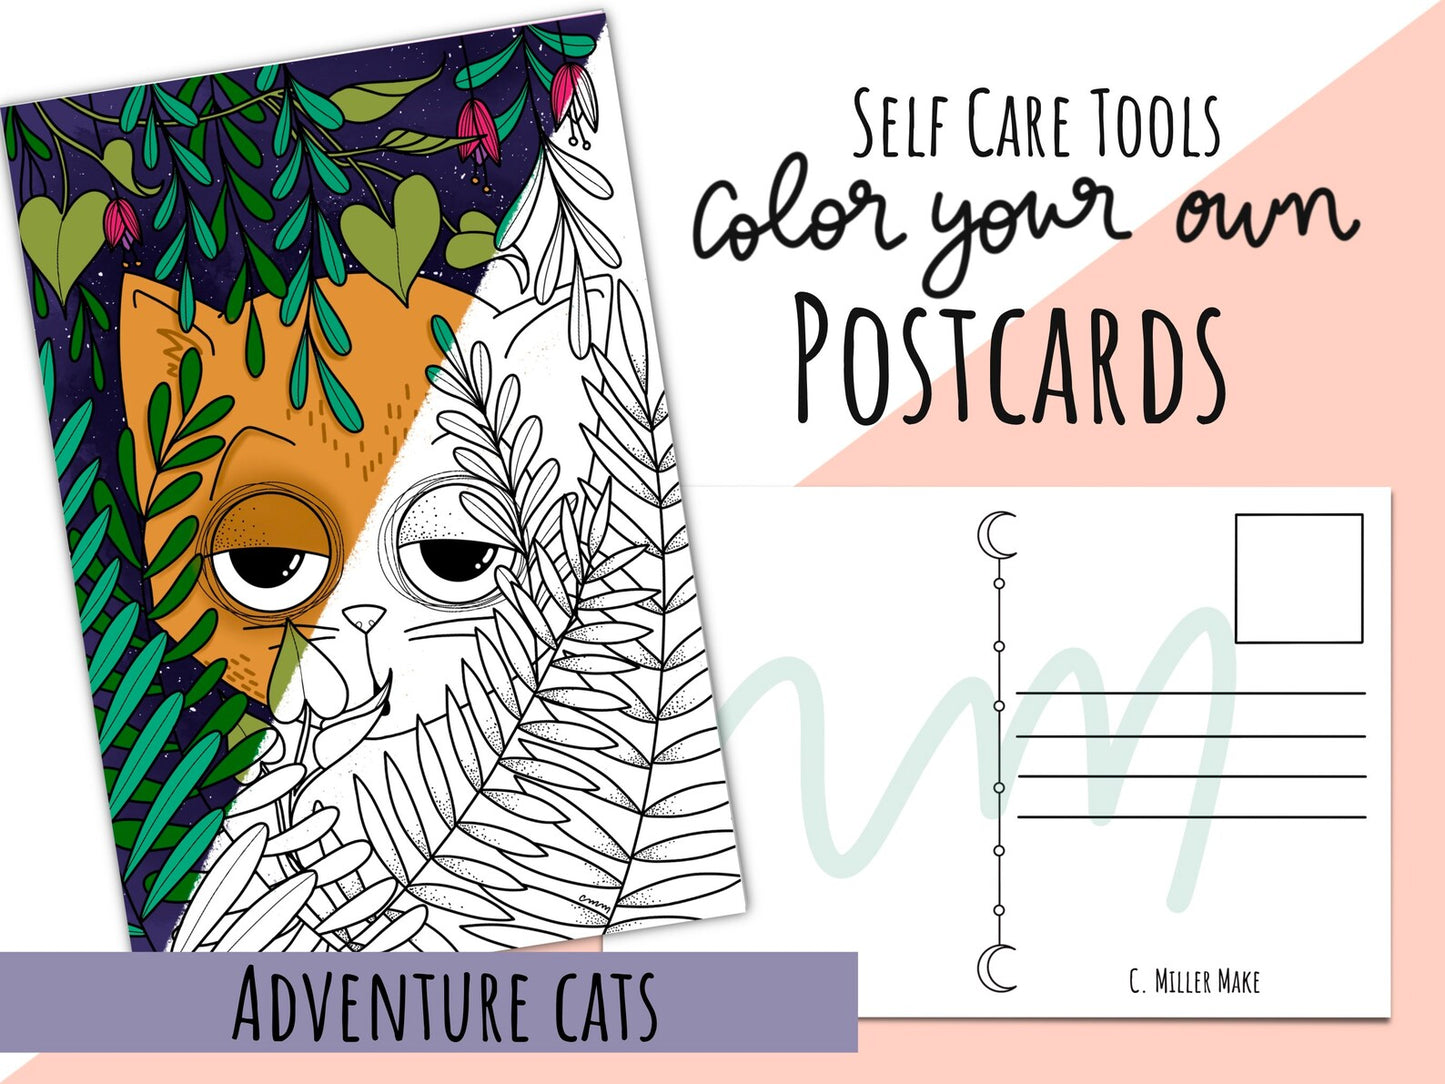 Adventure Cats: Set of 4 Color Your Own Postcards- Self Care Tools Adult Coloring & Meditation- 4 Unique Designs